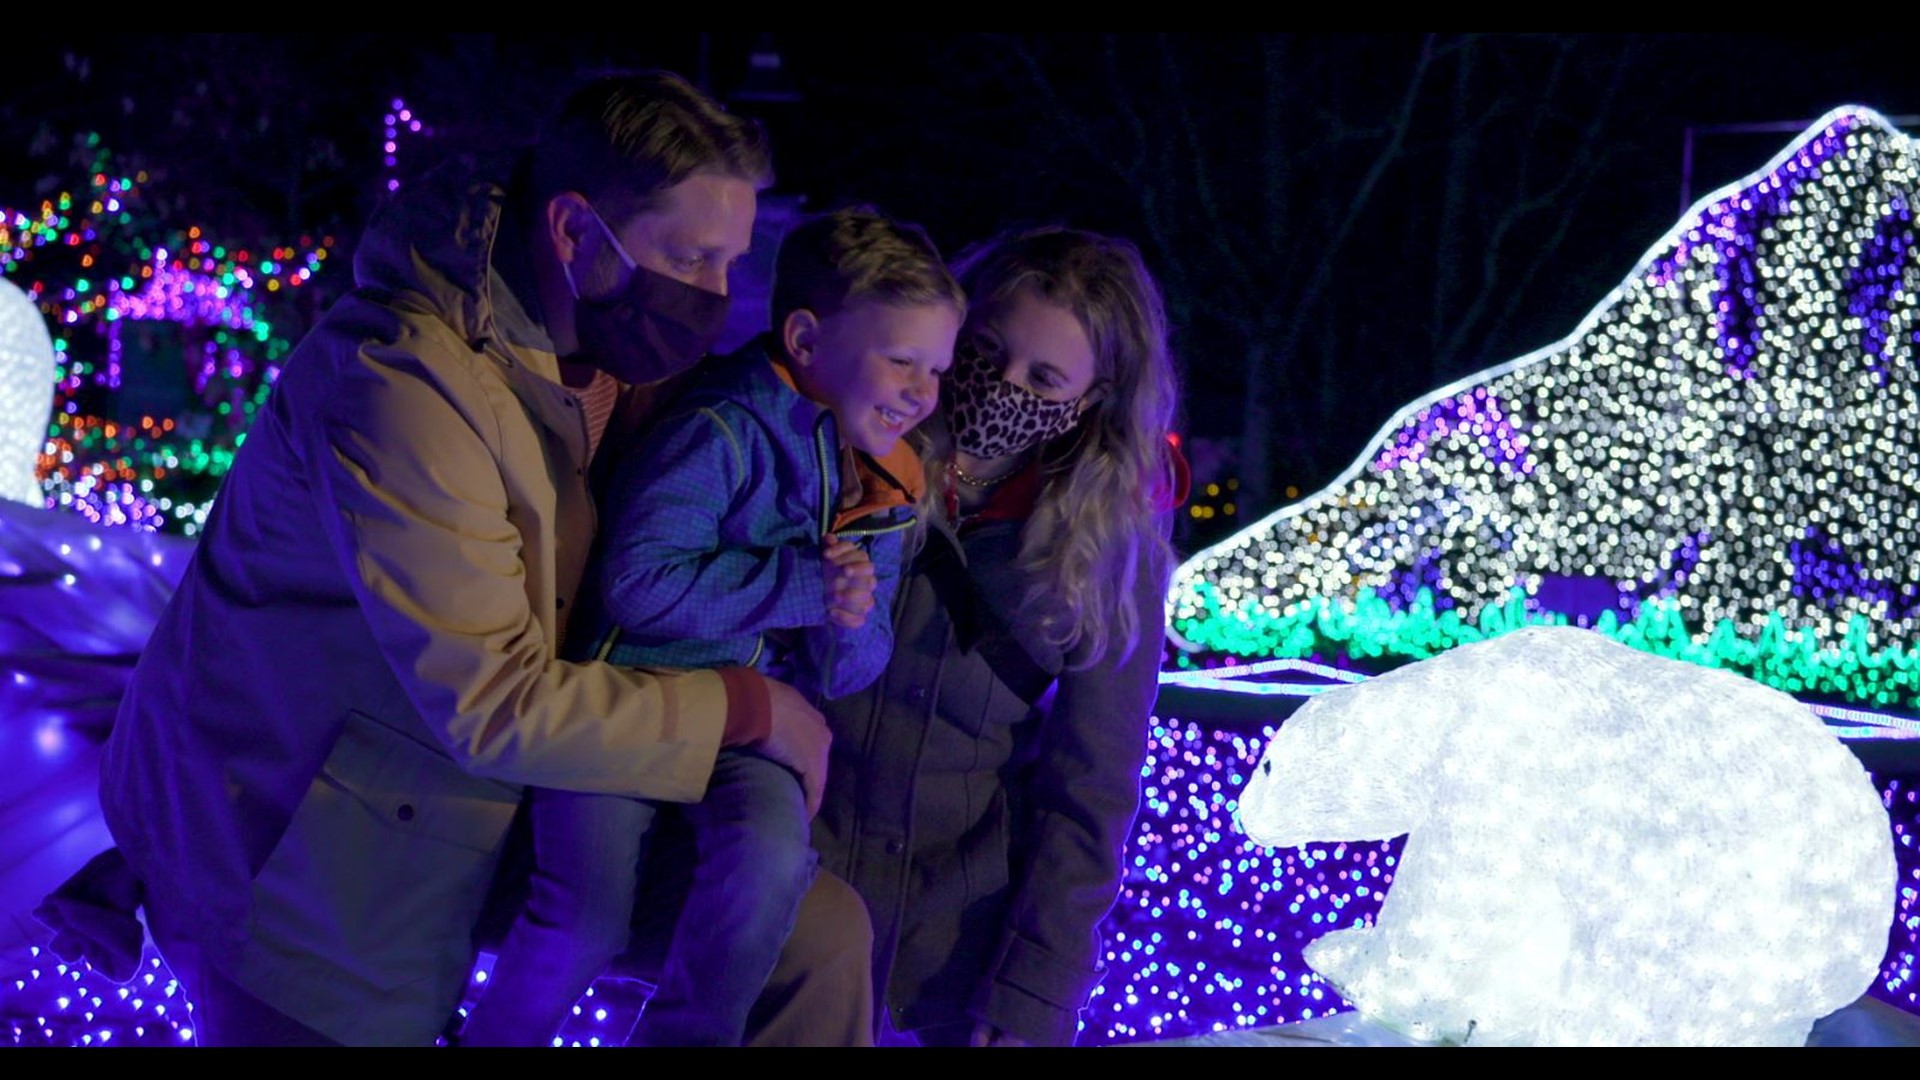 Zoo Lights celebrates 33 years with new restrictions during the pandemic